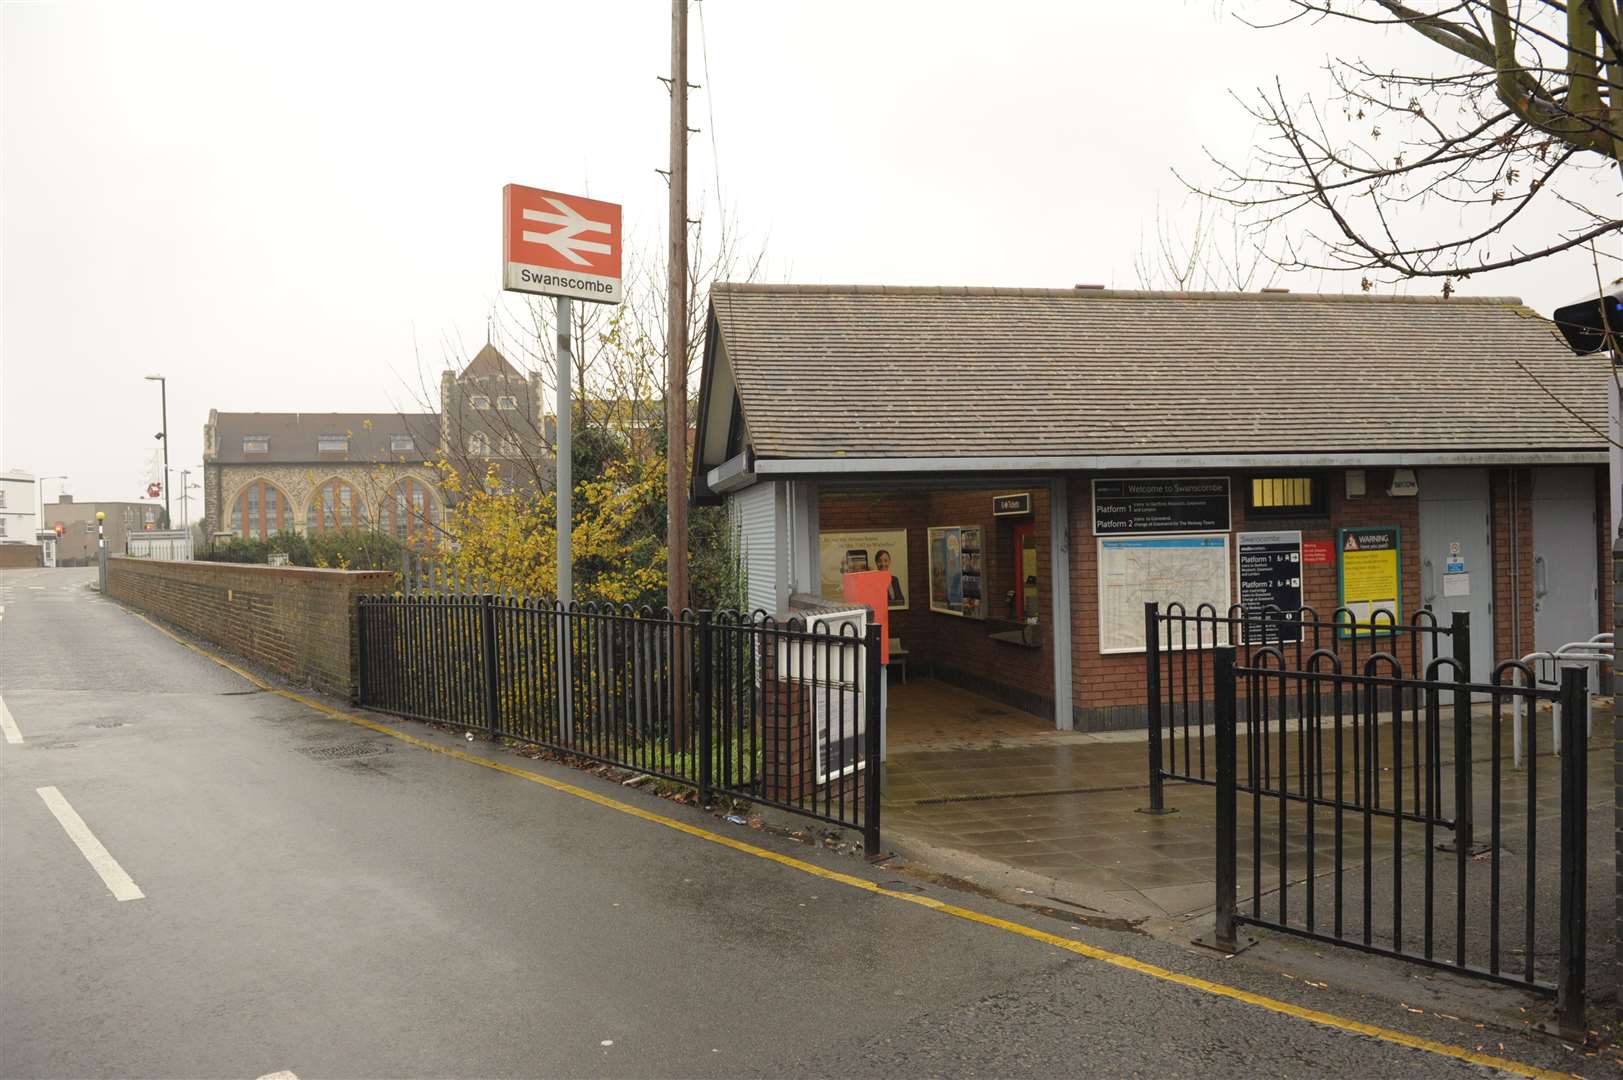 Swanscombe Train Station, where George was struck by an oncoming train. Picture: Steve Crispe